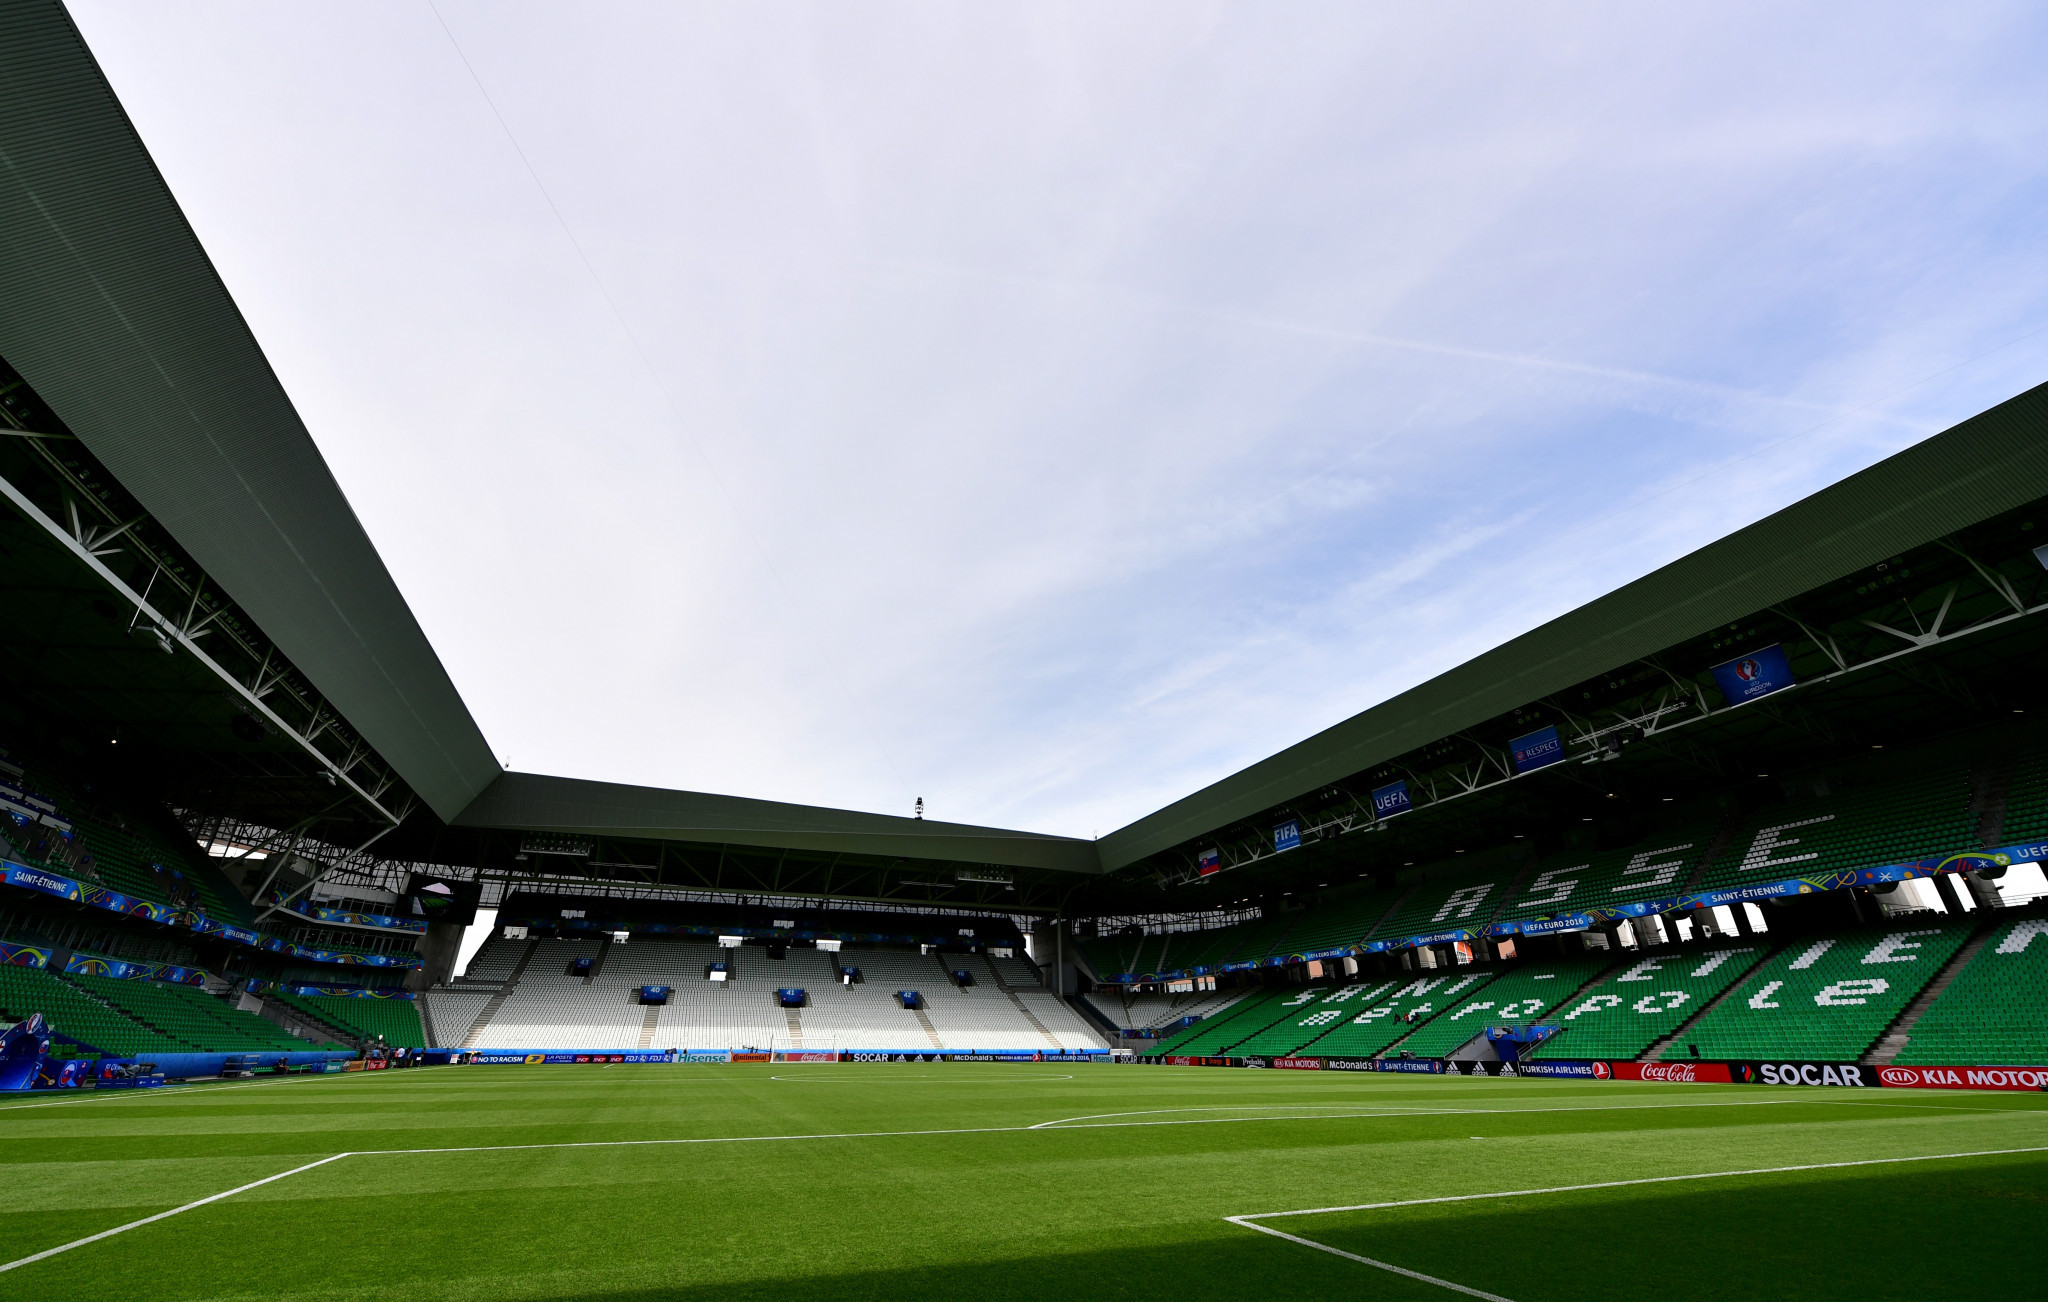 The Stade Geoffroy-Guichard in Saint-Étienne is set to host one of the first men's football matches on July 24 ©Getty Images